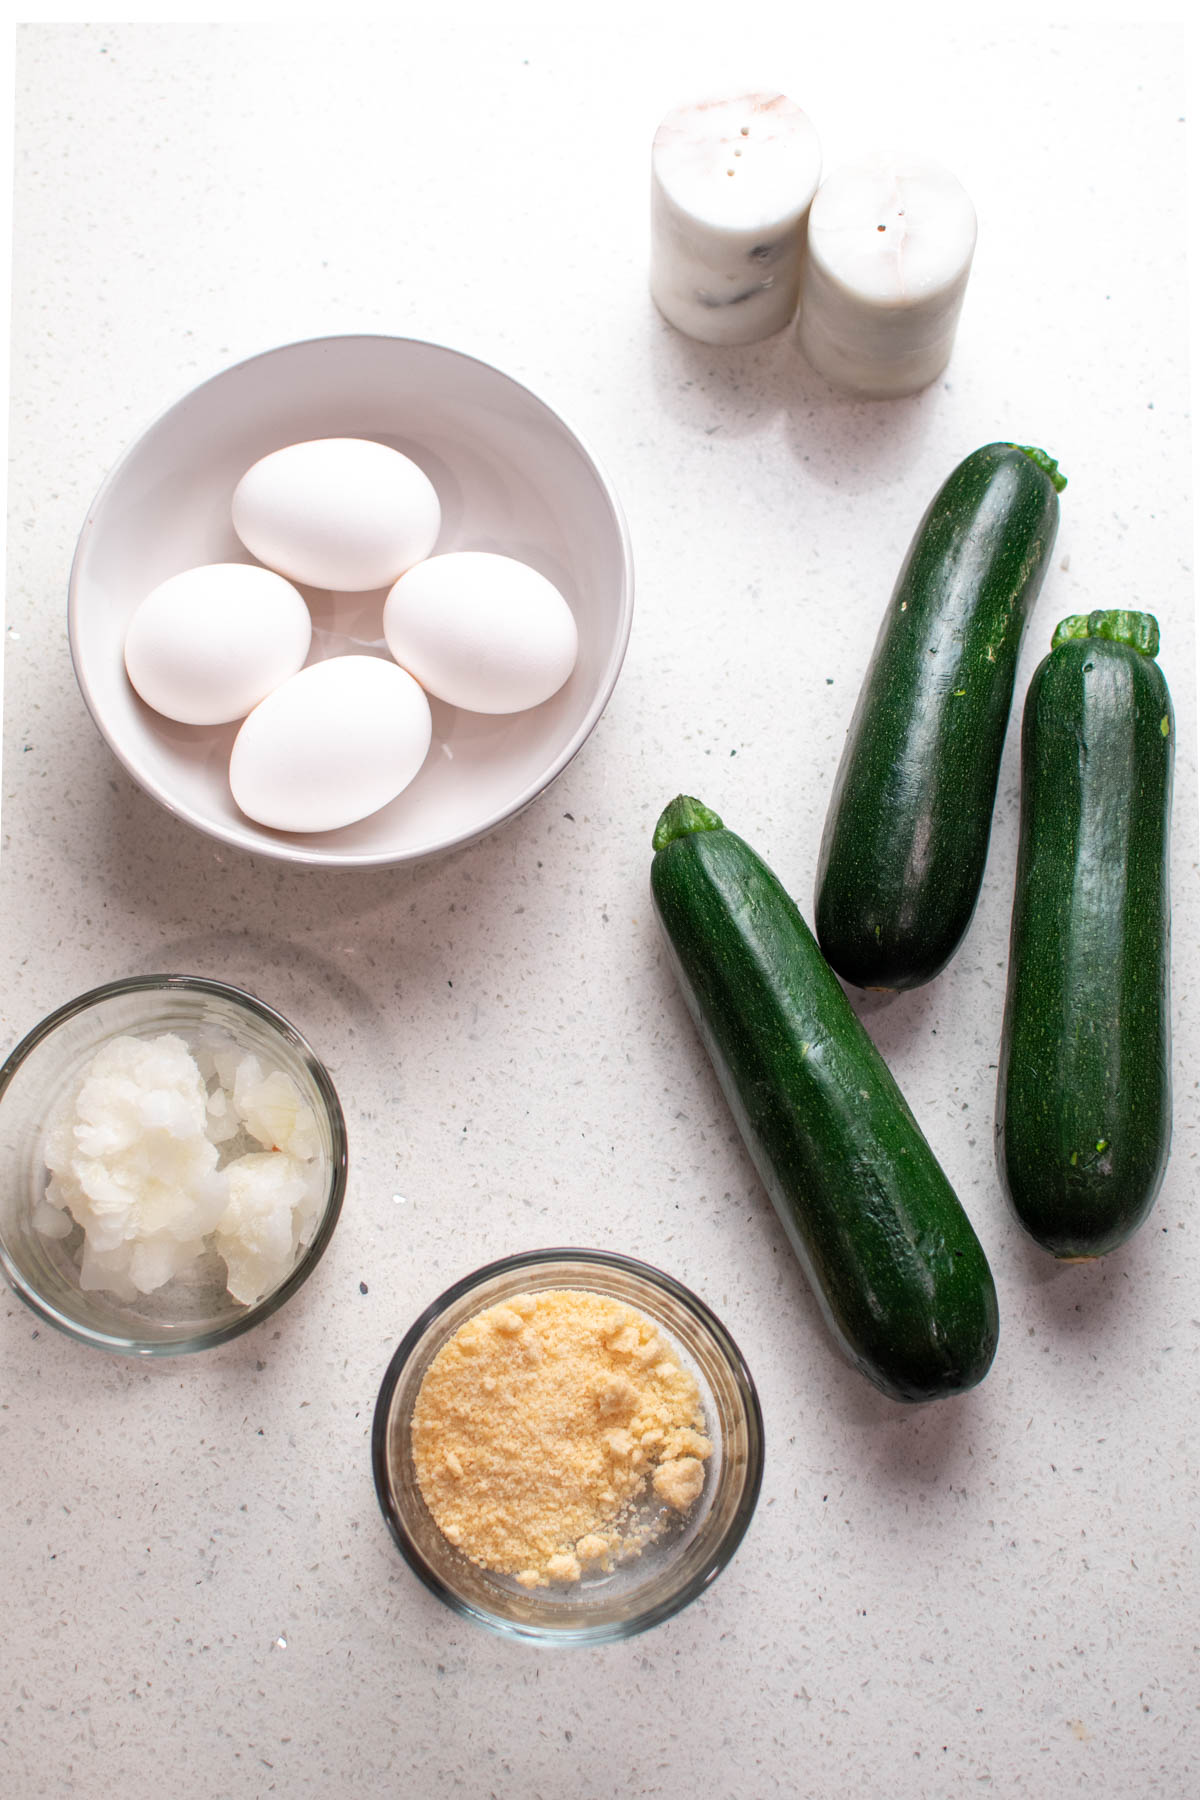 Ingredients for zucchini scrambled eggs on quartz countertop including eggs, onion, and parmesan cheese.